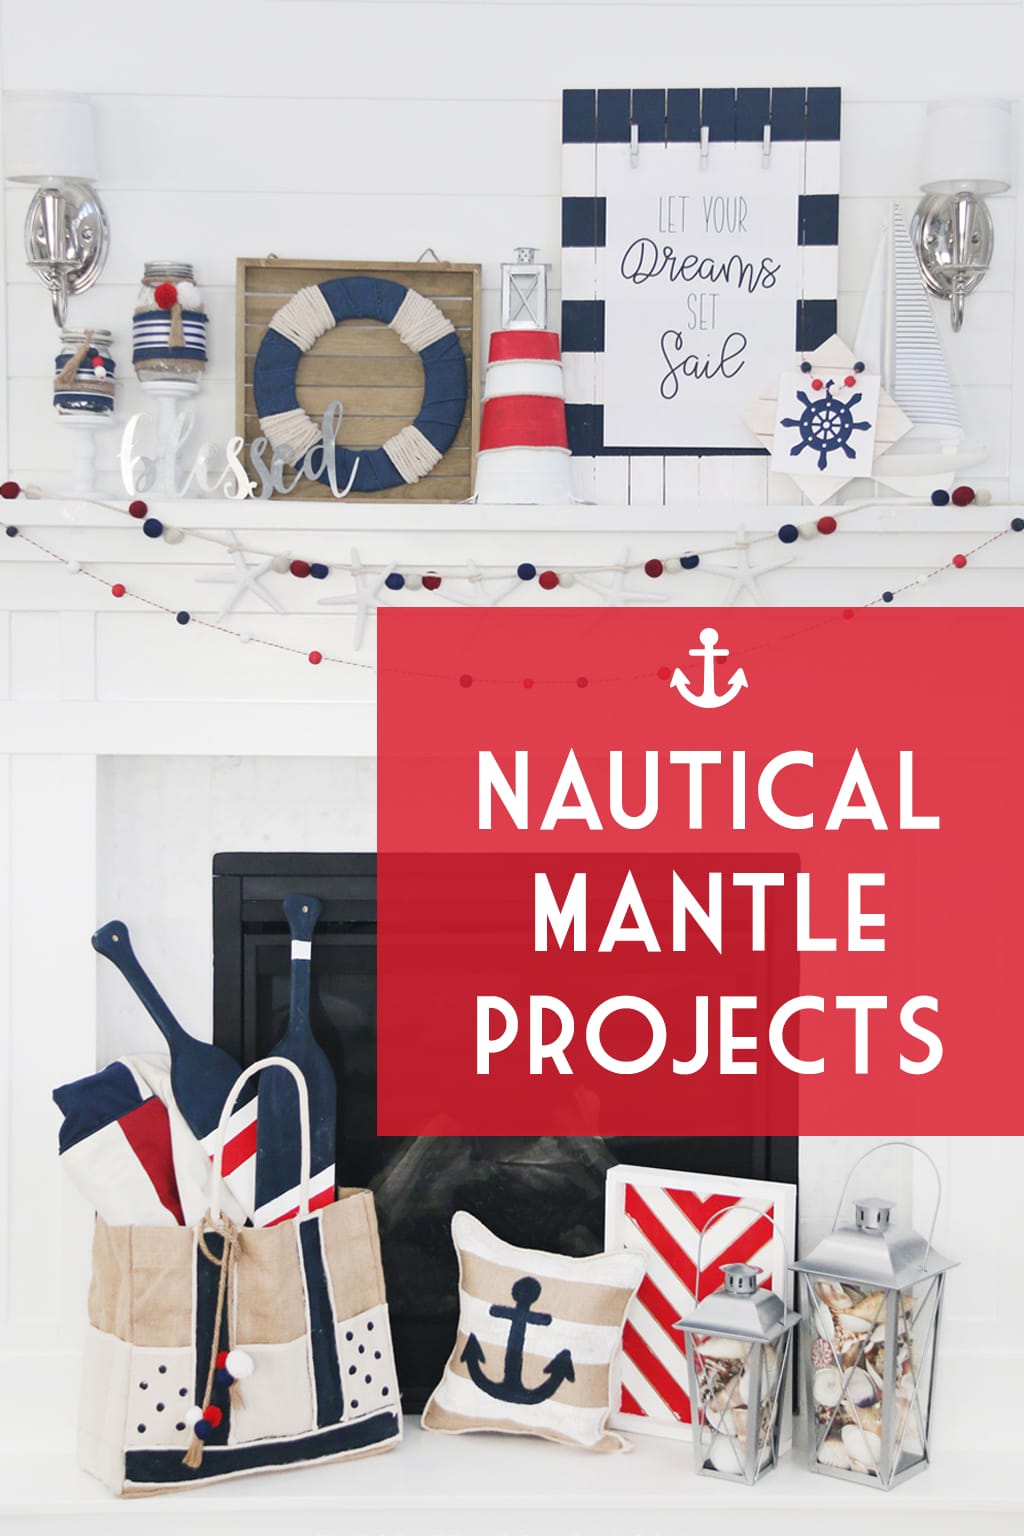 Nautical Mantle Projects